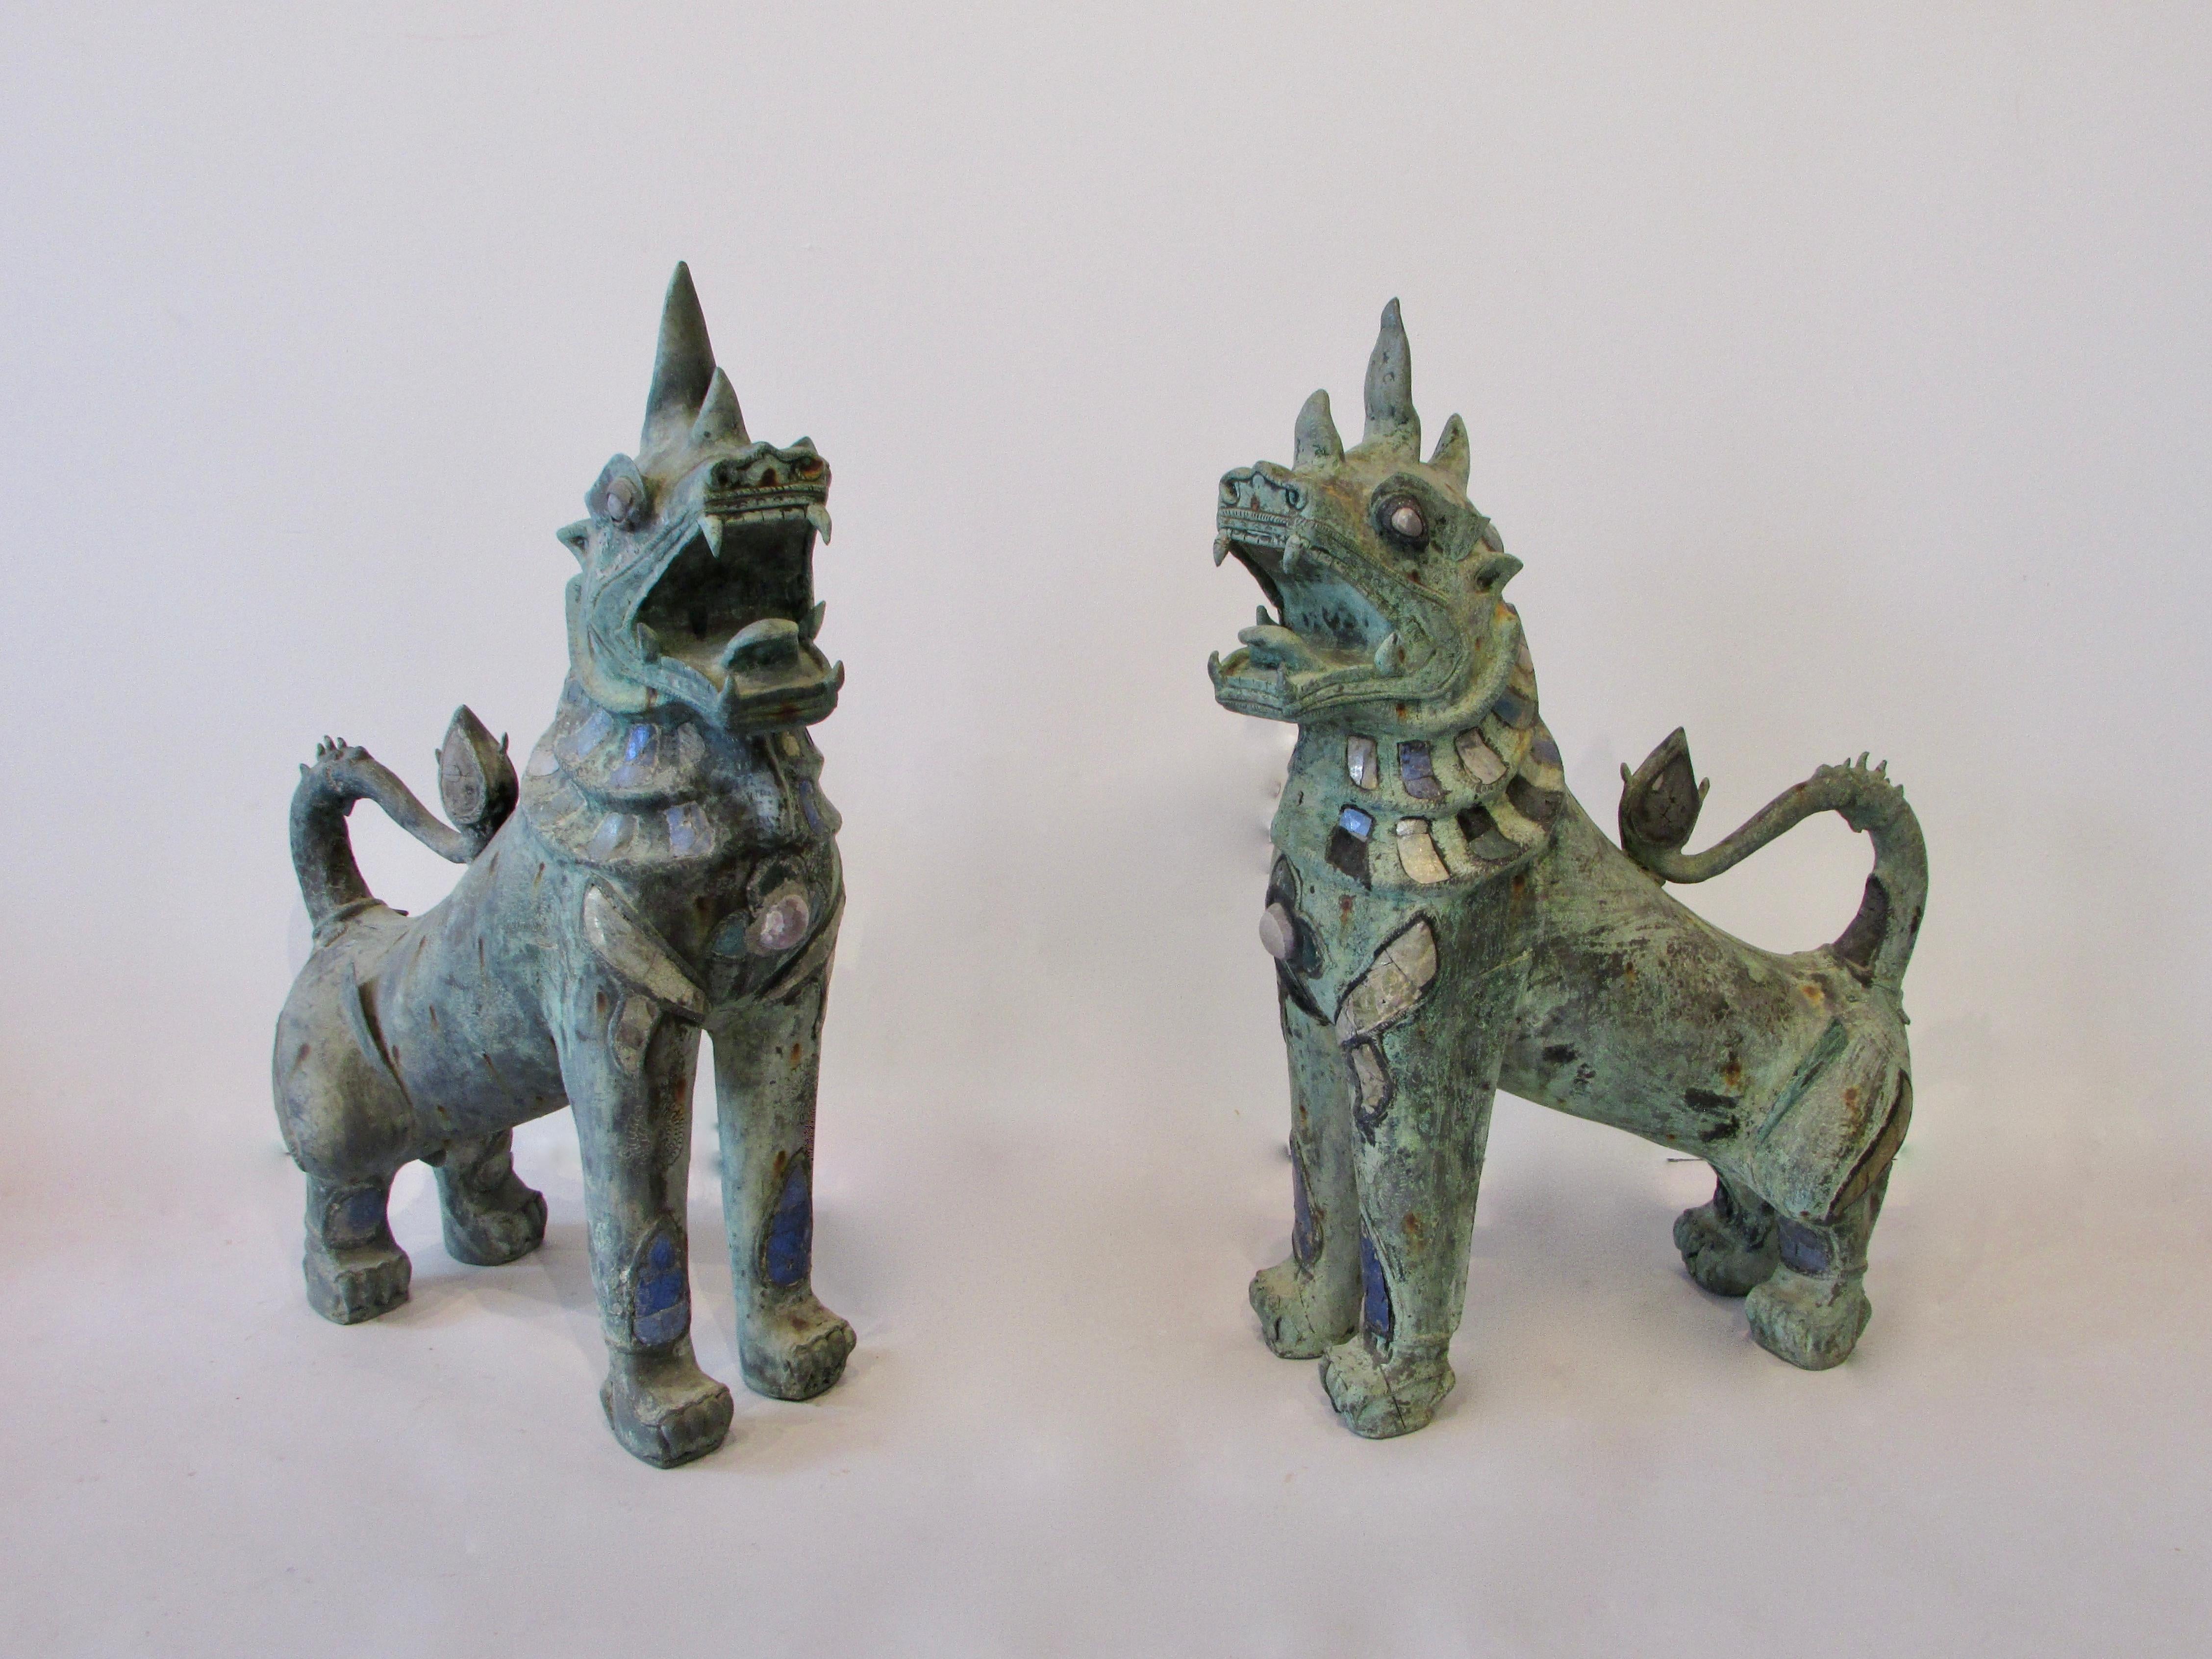 Pair of antique bronze Thai foo lions. They are a right and left pair. Heads are turned in opposing direction. Bodies are embellished with semi precious or mineral stones. Large ferocious old and impressive.